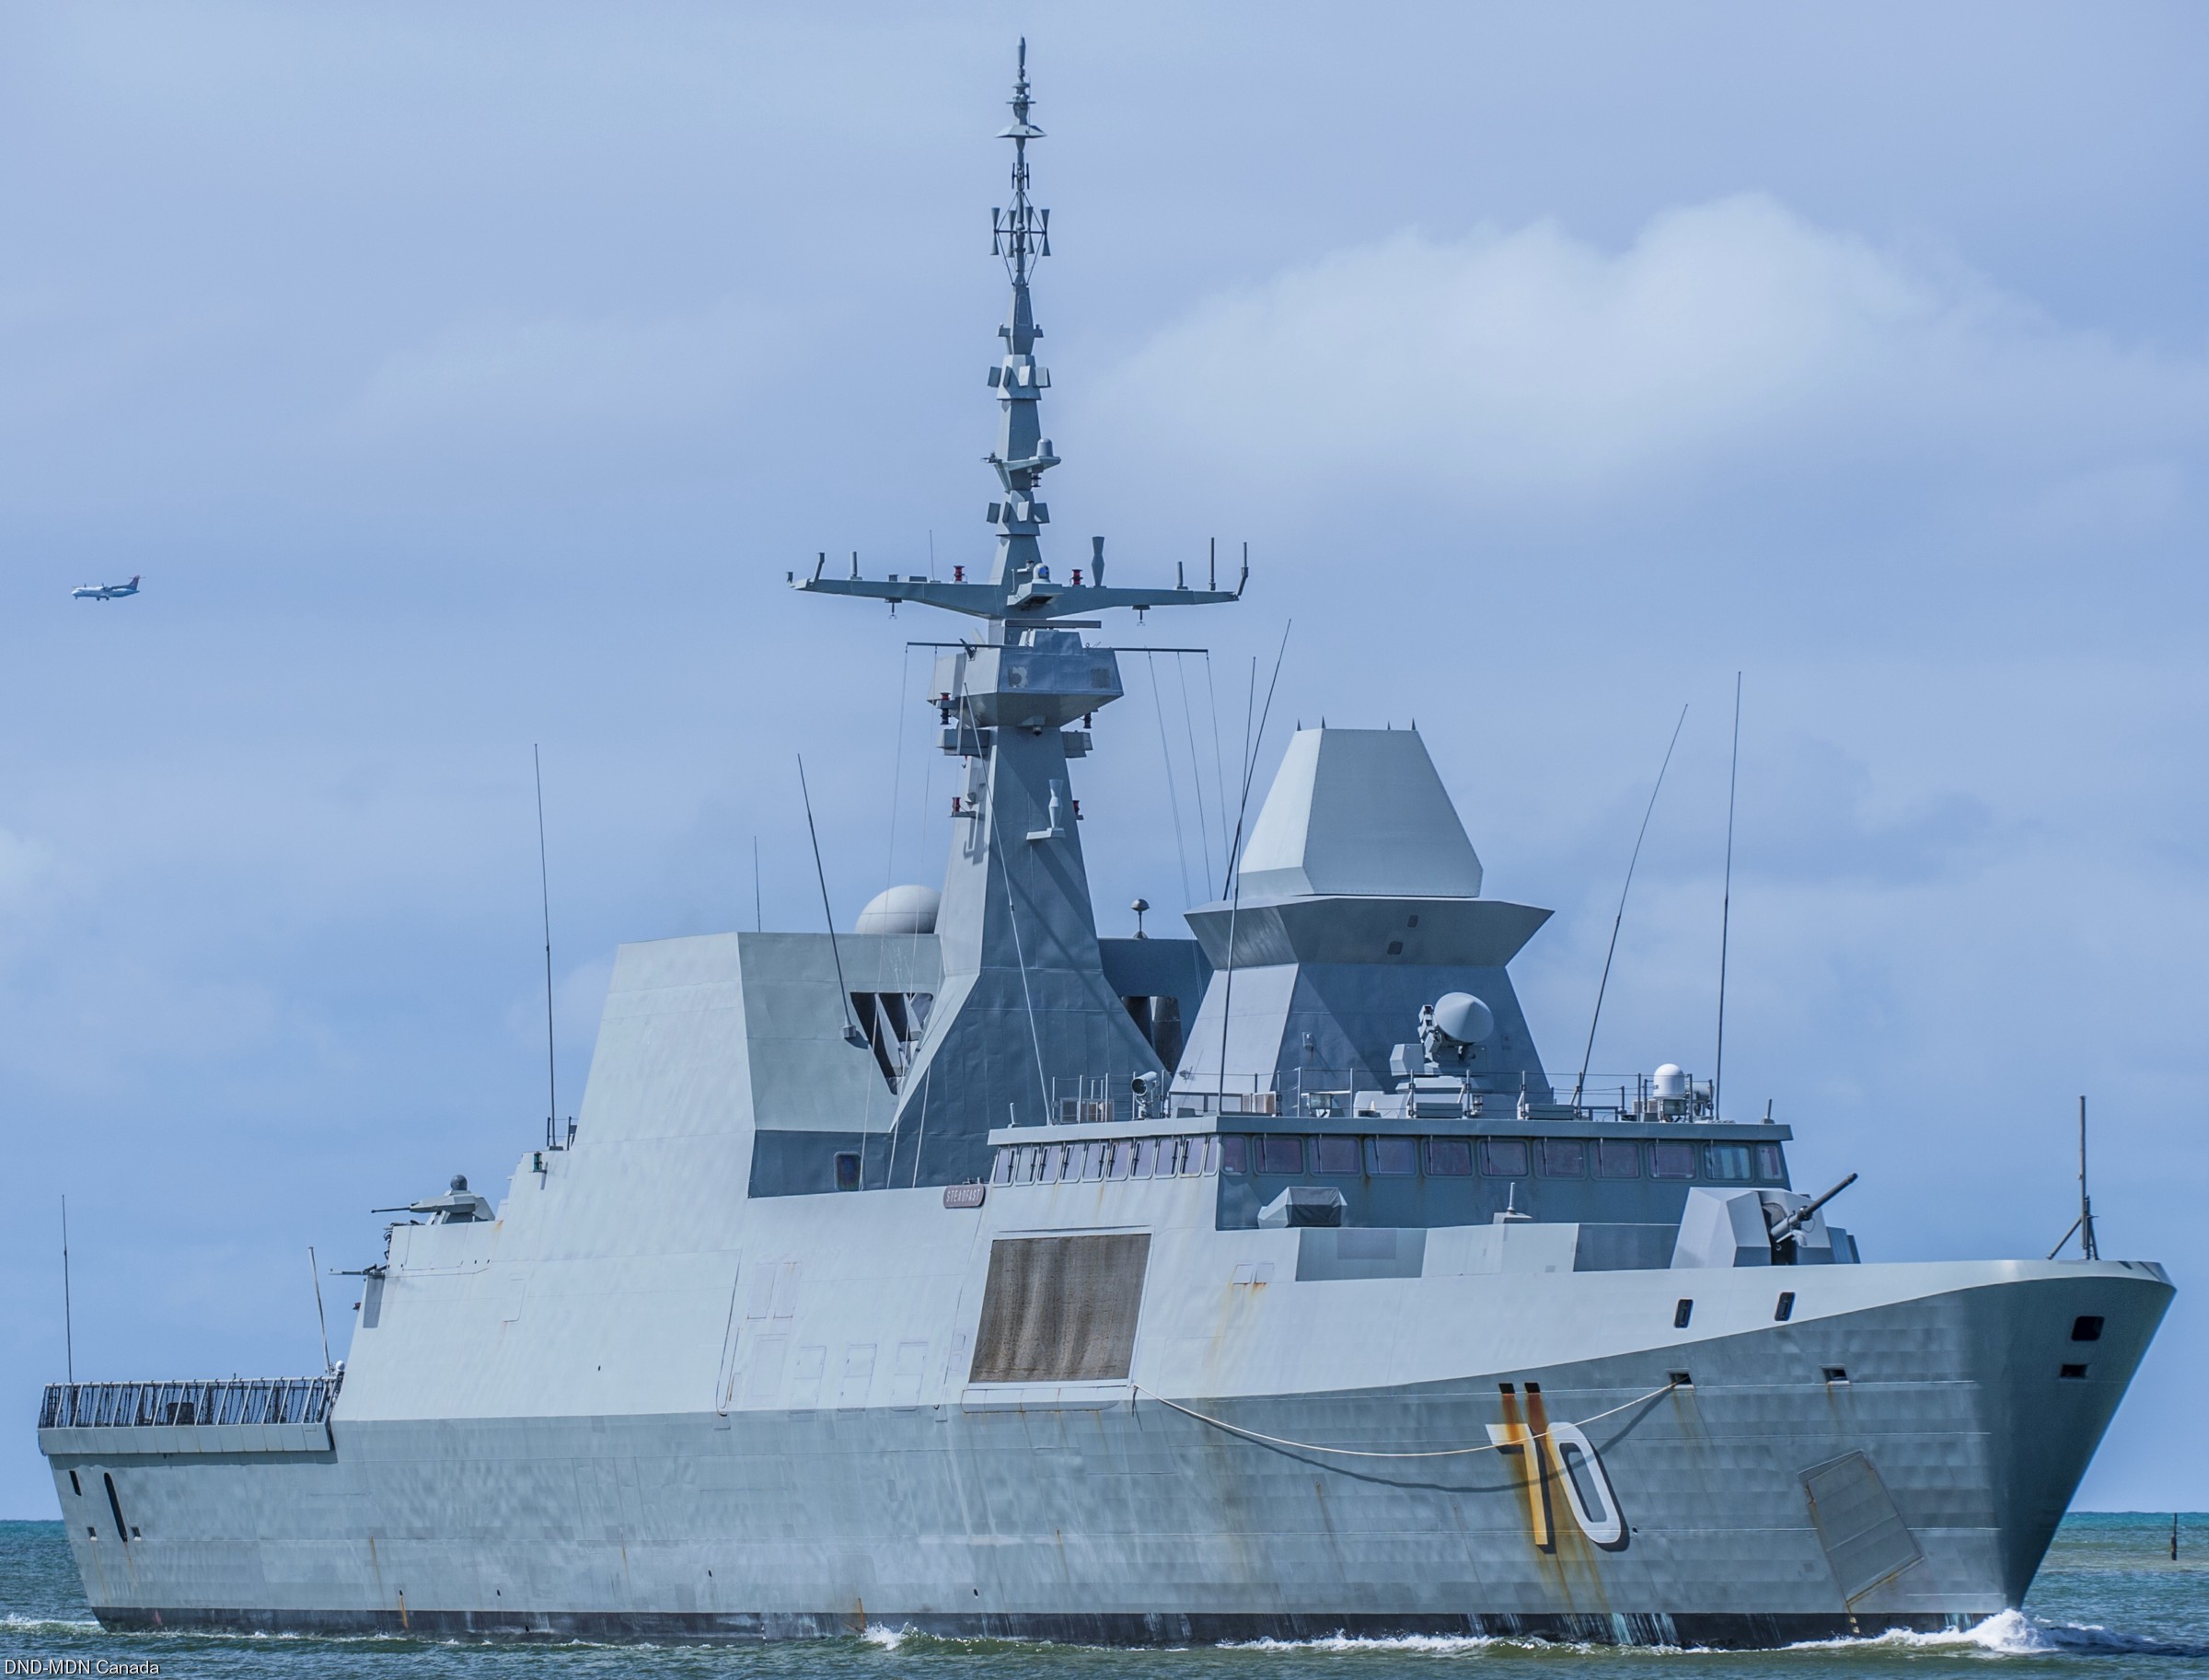 70 rss steadfast formidable class multi-mission missile frigate ffg republic singapore navy 18